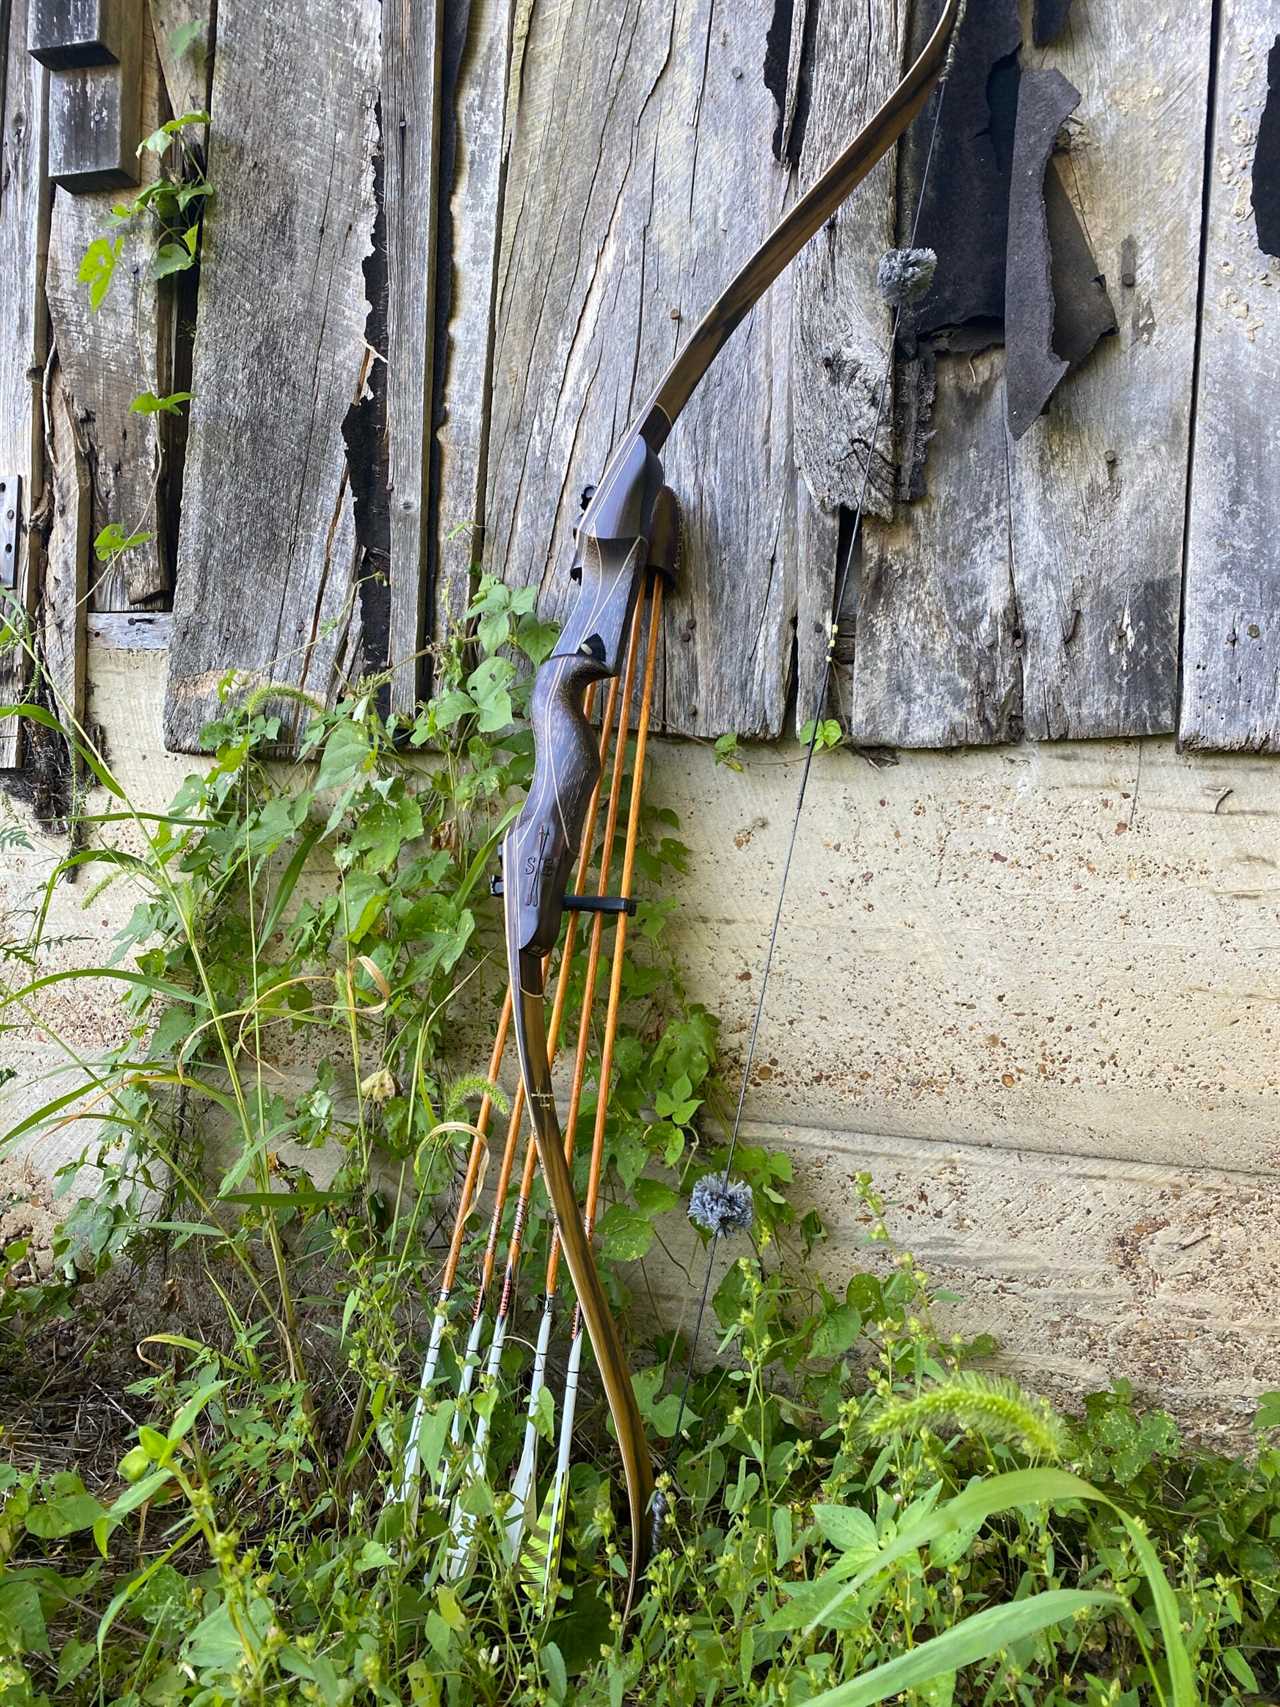 The Best Recurve Bows of 2023